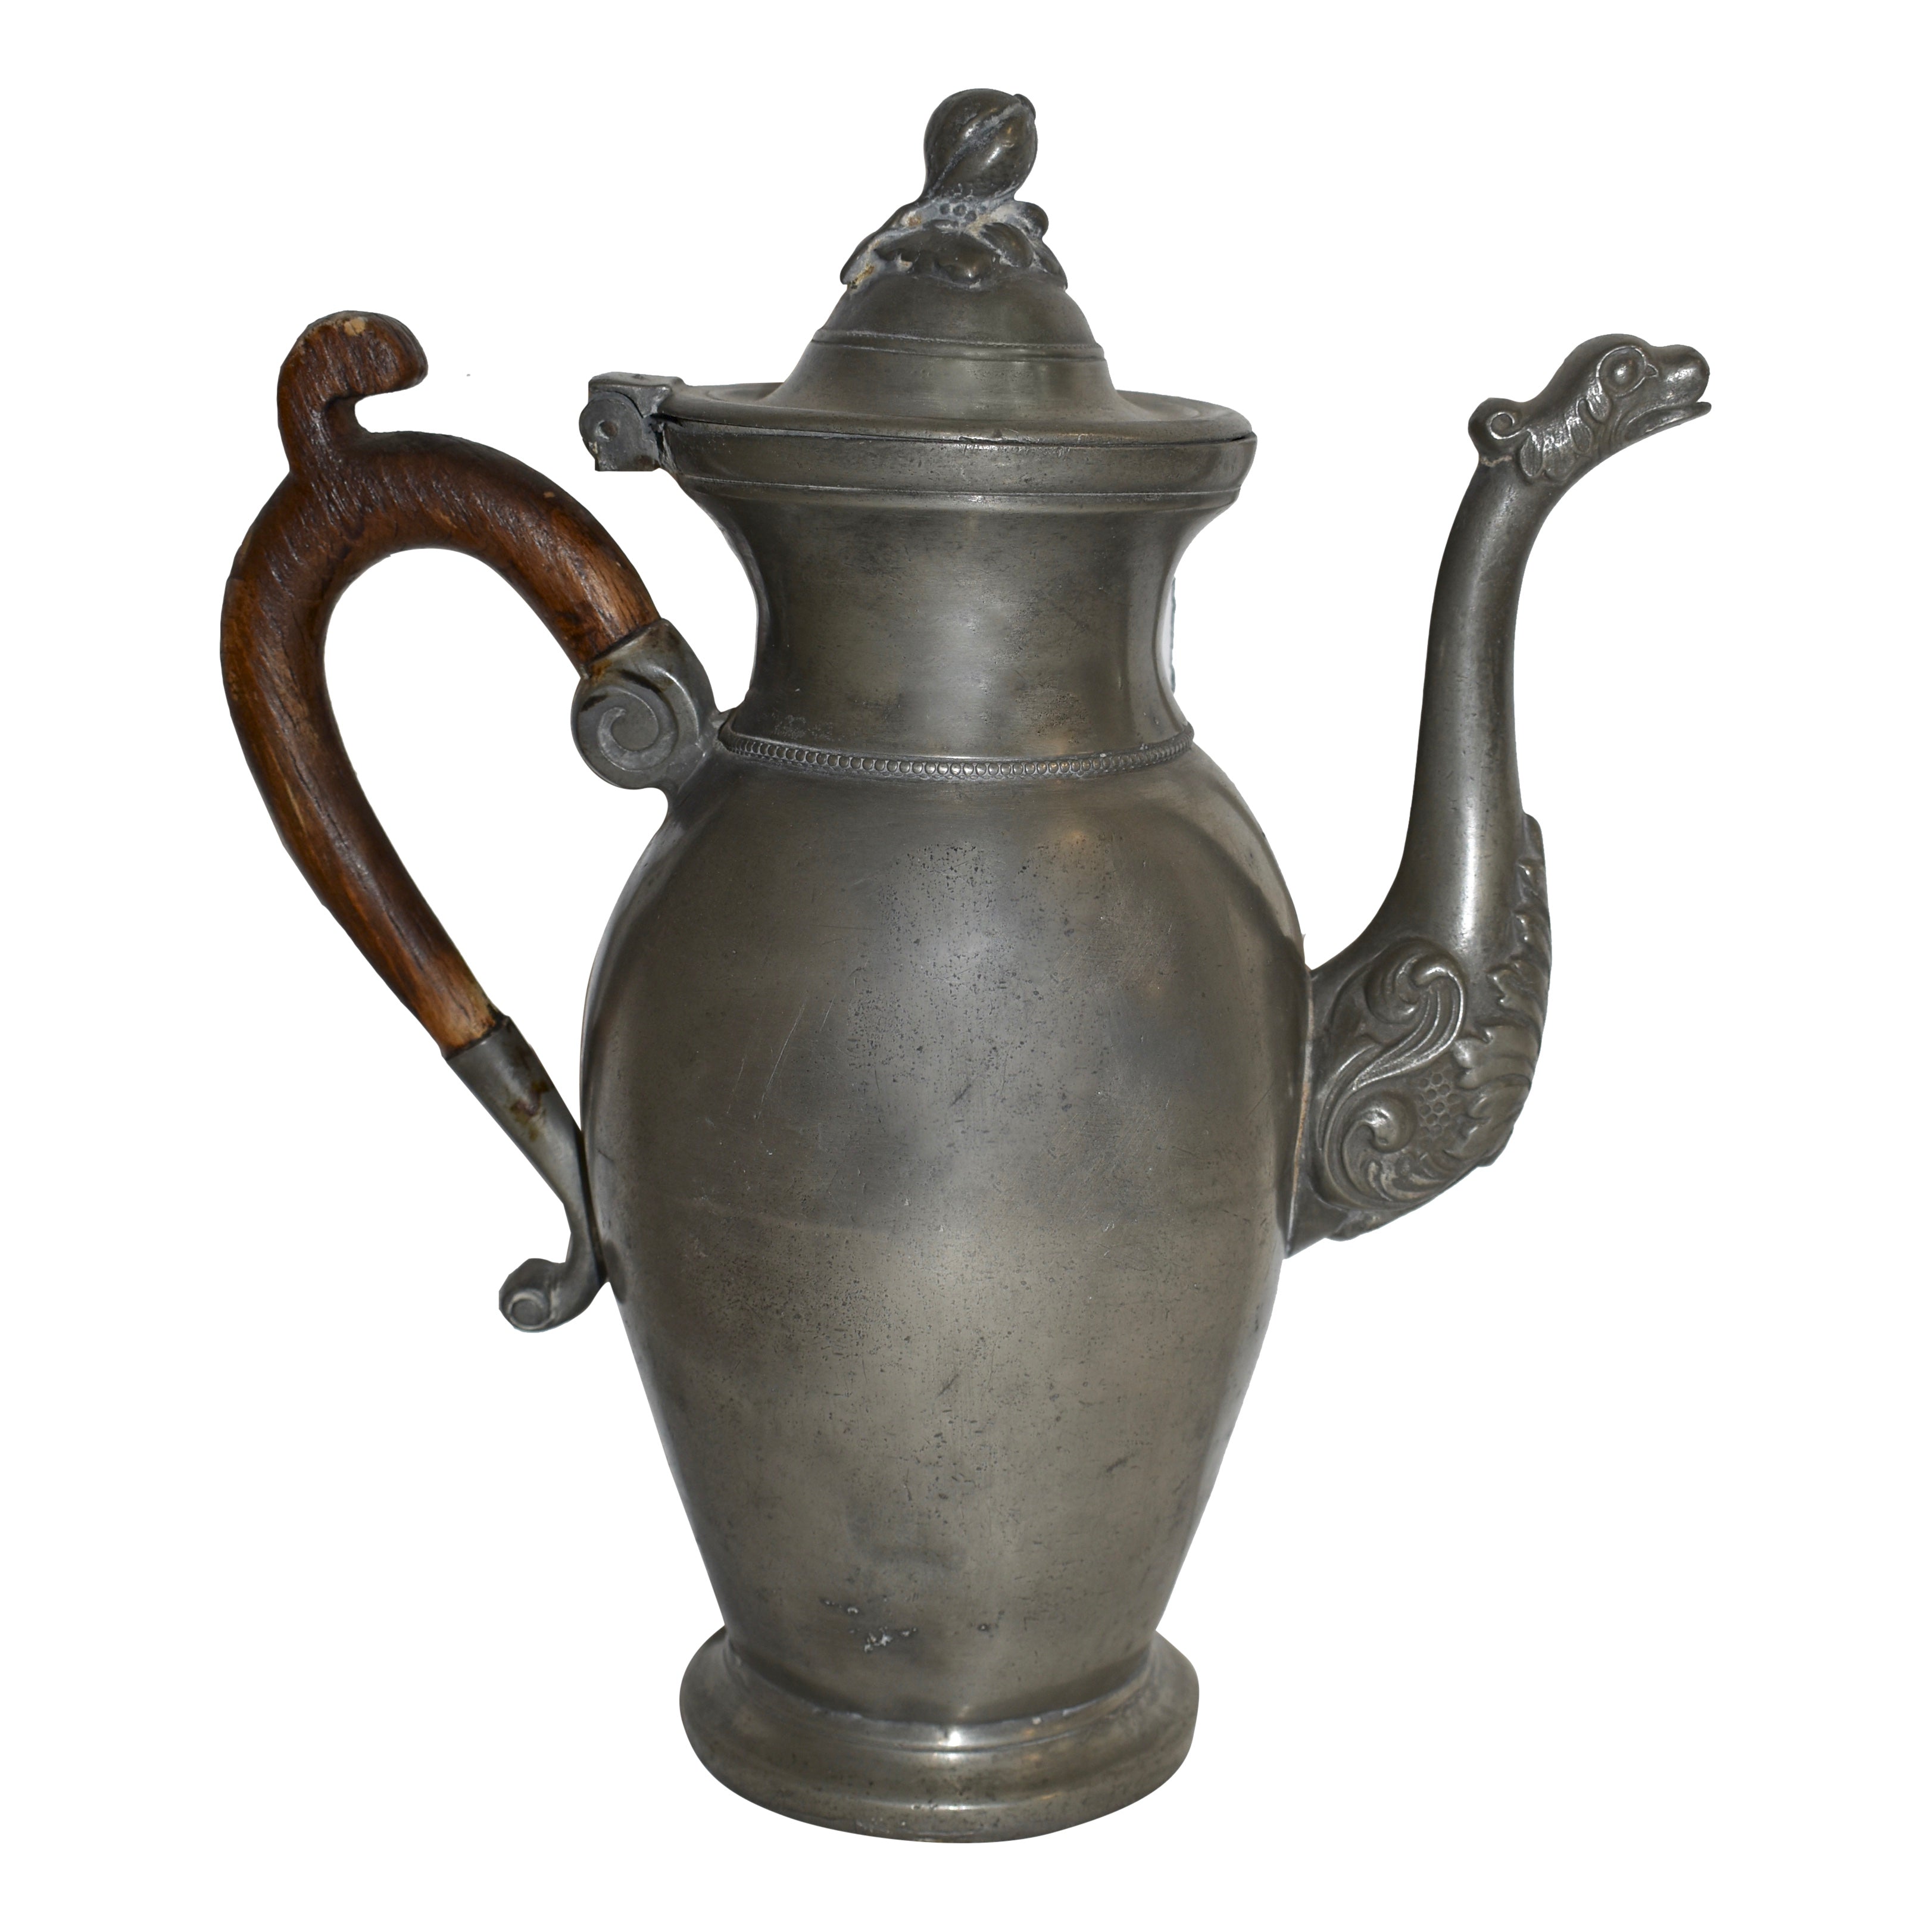 Flemish Pewter Teapot with Wooden Handle